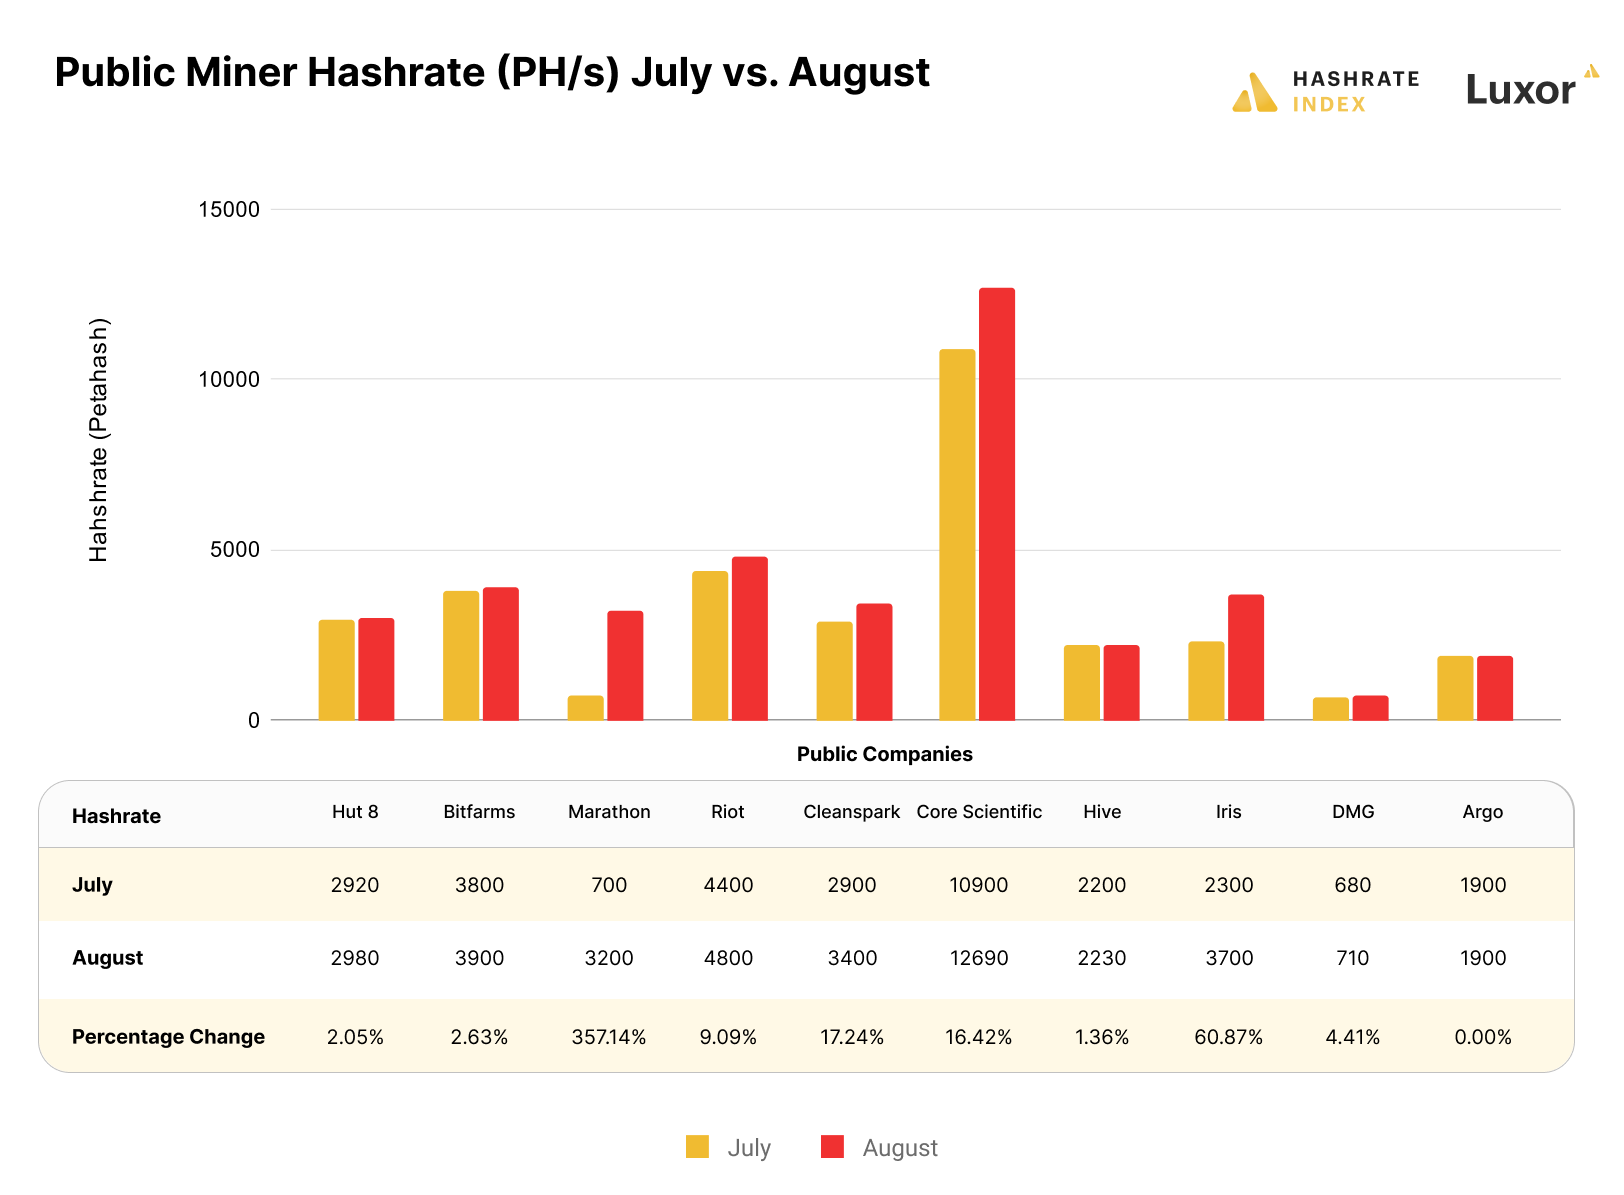 Bitcoin mining stock monthly hashrate  | Source: public disclosures